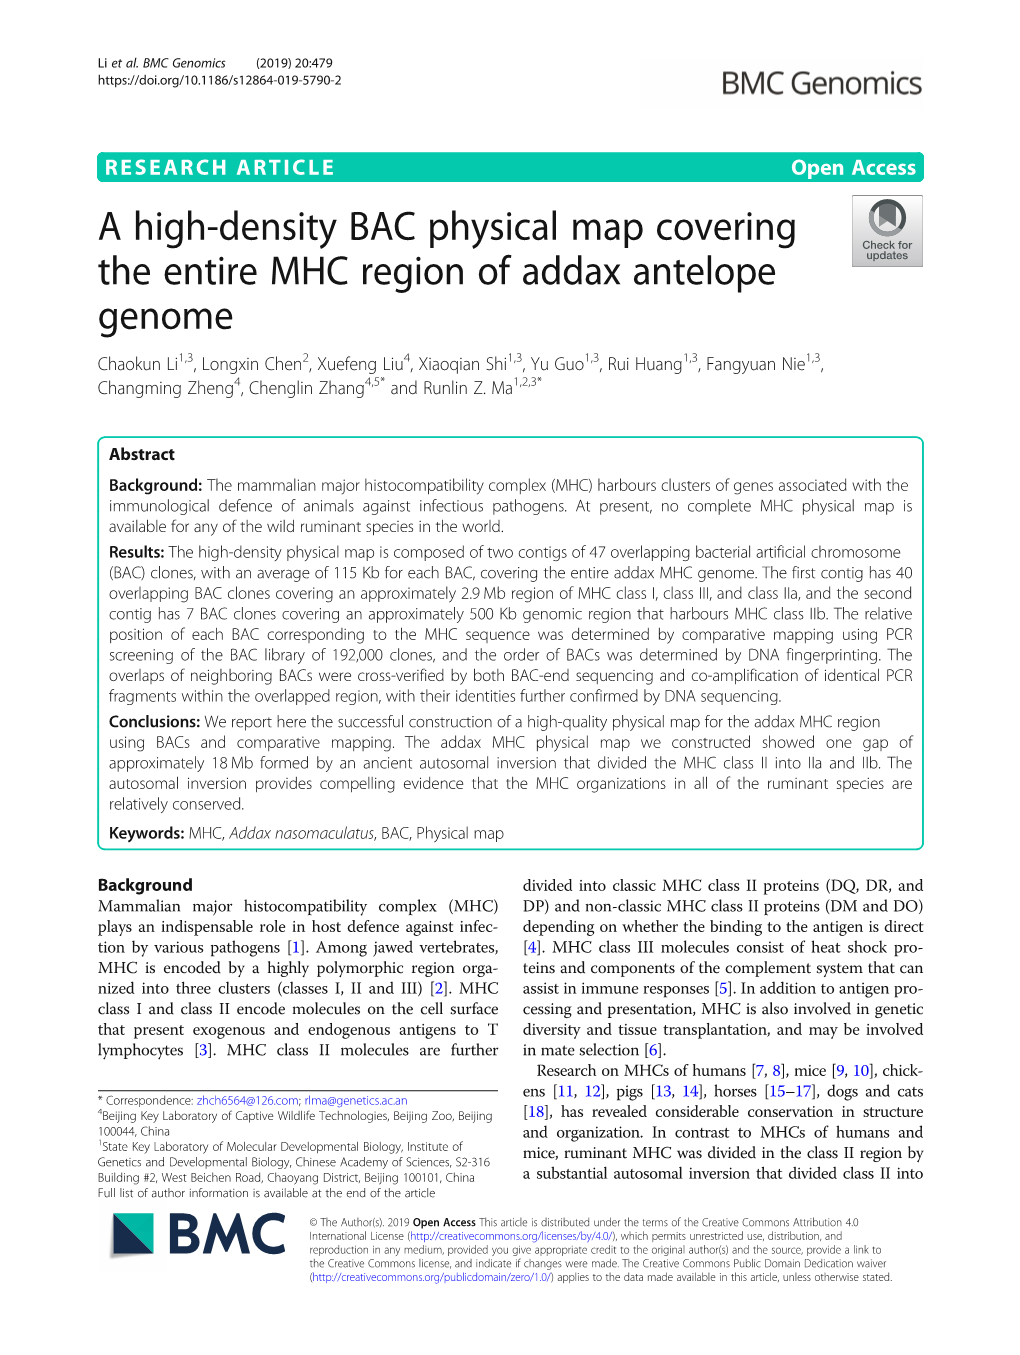 A High-Density BAC Physical Map Covering the Entire MHC Region Of